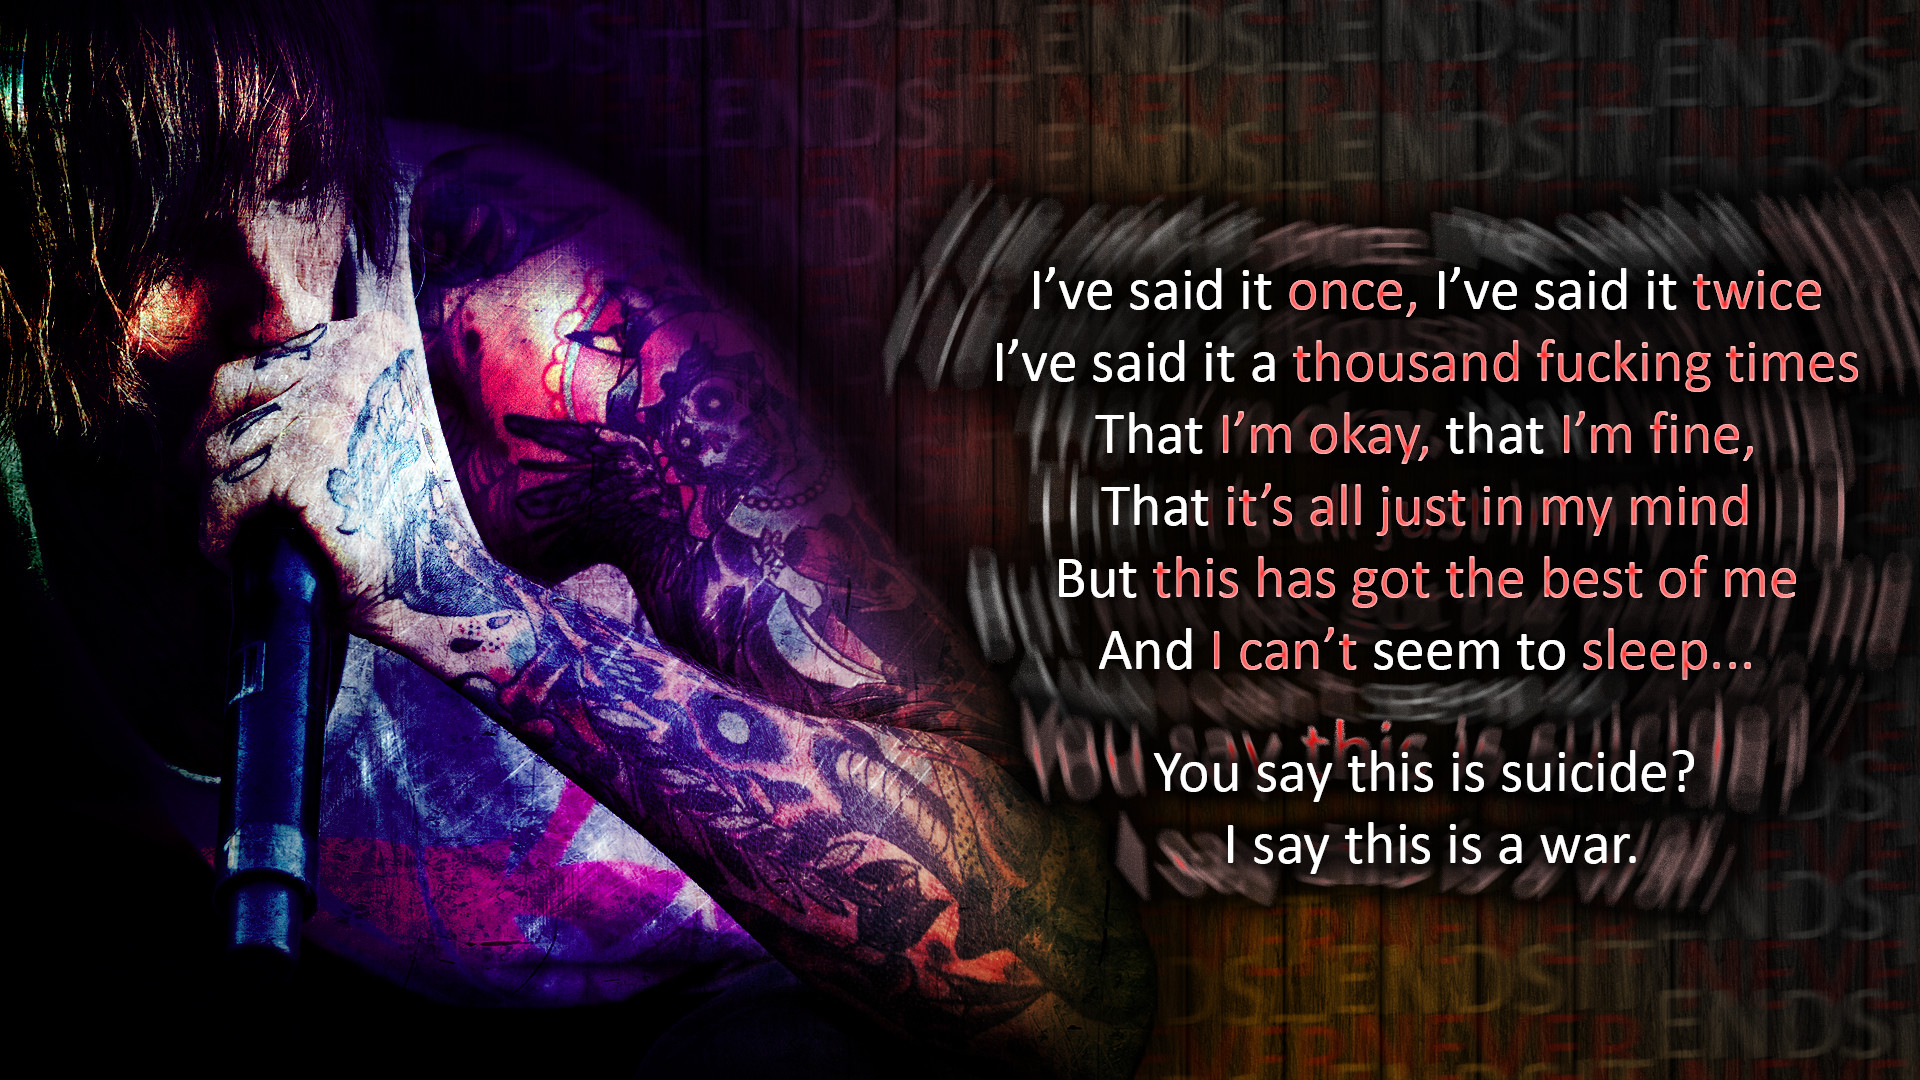 1920x1080 Bring Me The Horizon - It Never Ends Wallpaper by Nurbz4D on .